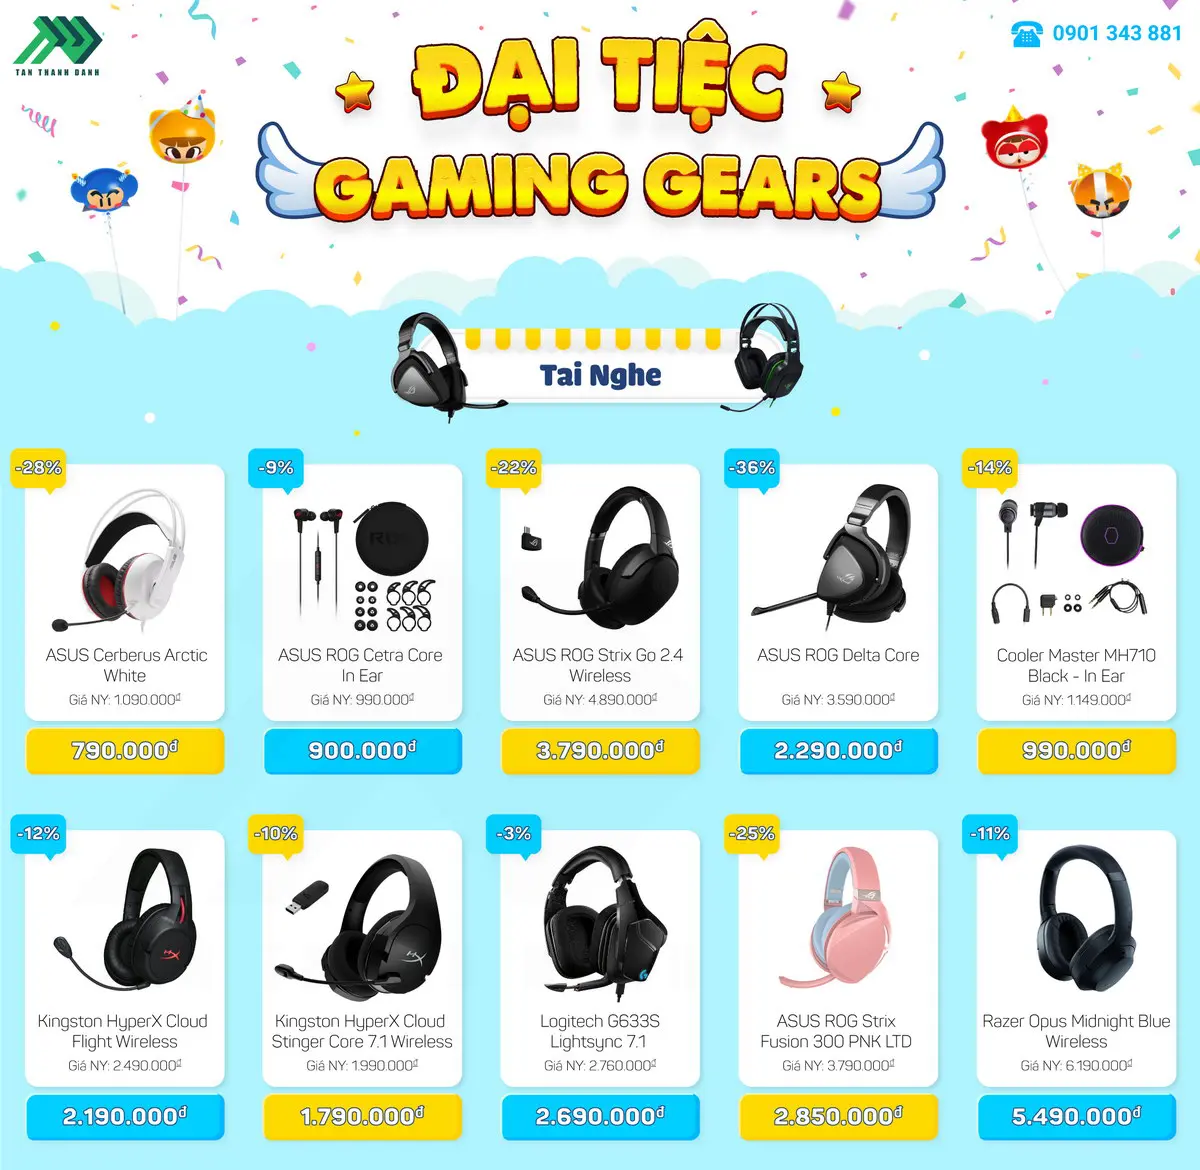 TTD Promotion 2010 DaiTiecGamingGears TaiNghe v2